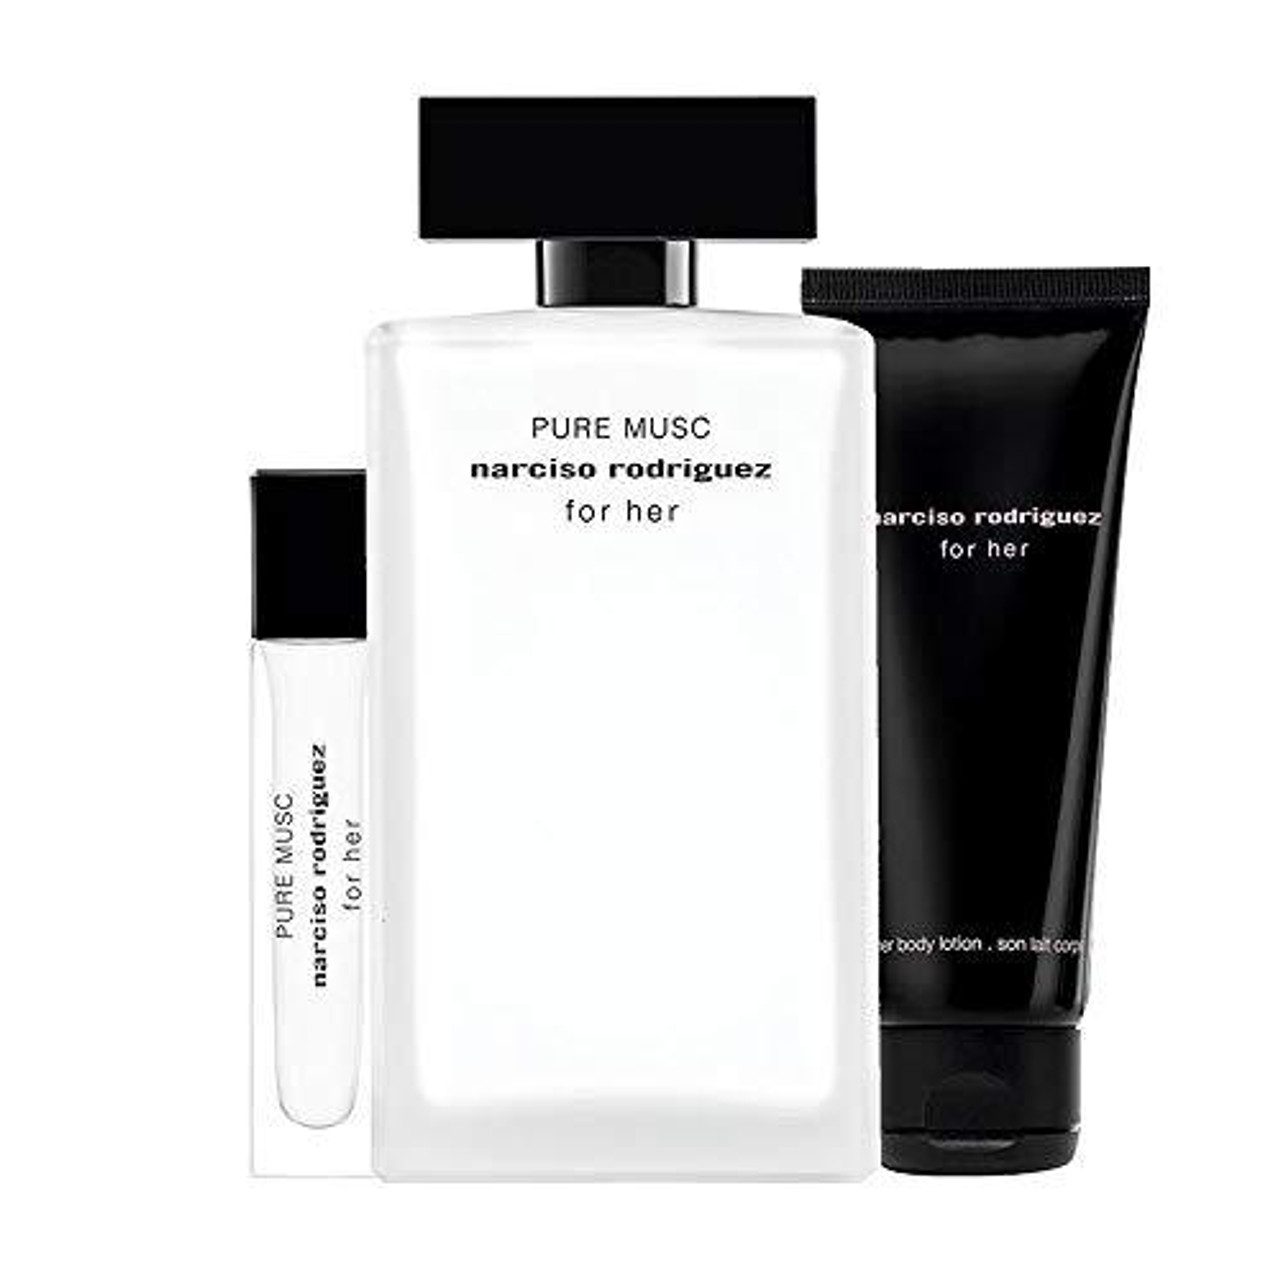 PURE - EDP 3PCS + FOR 0.33OZ BODY + RODRIGUES EDP Gift LOTION HER SET 1.7OZ MUSC NARCISO 3.4OZ